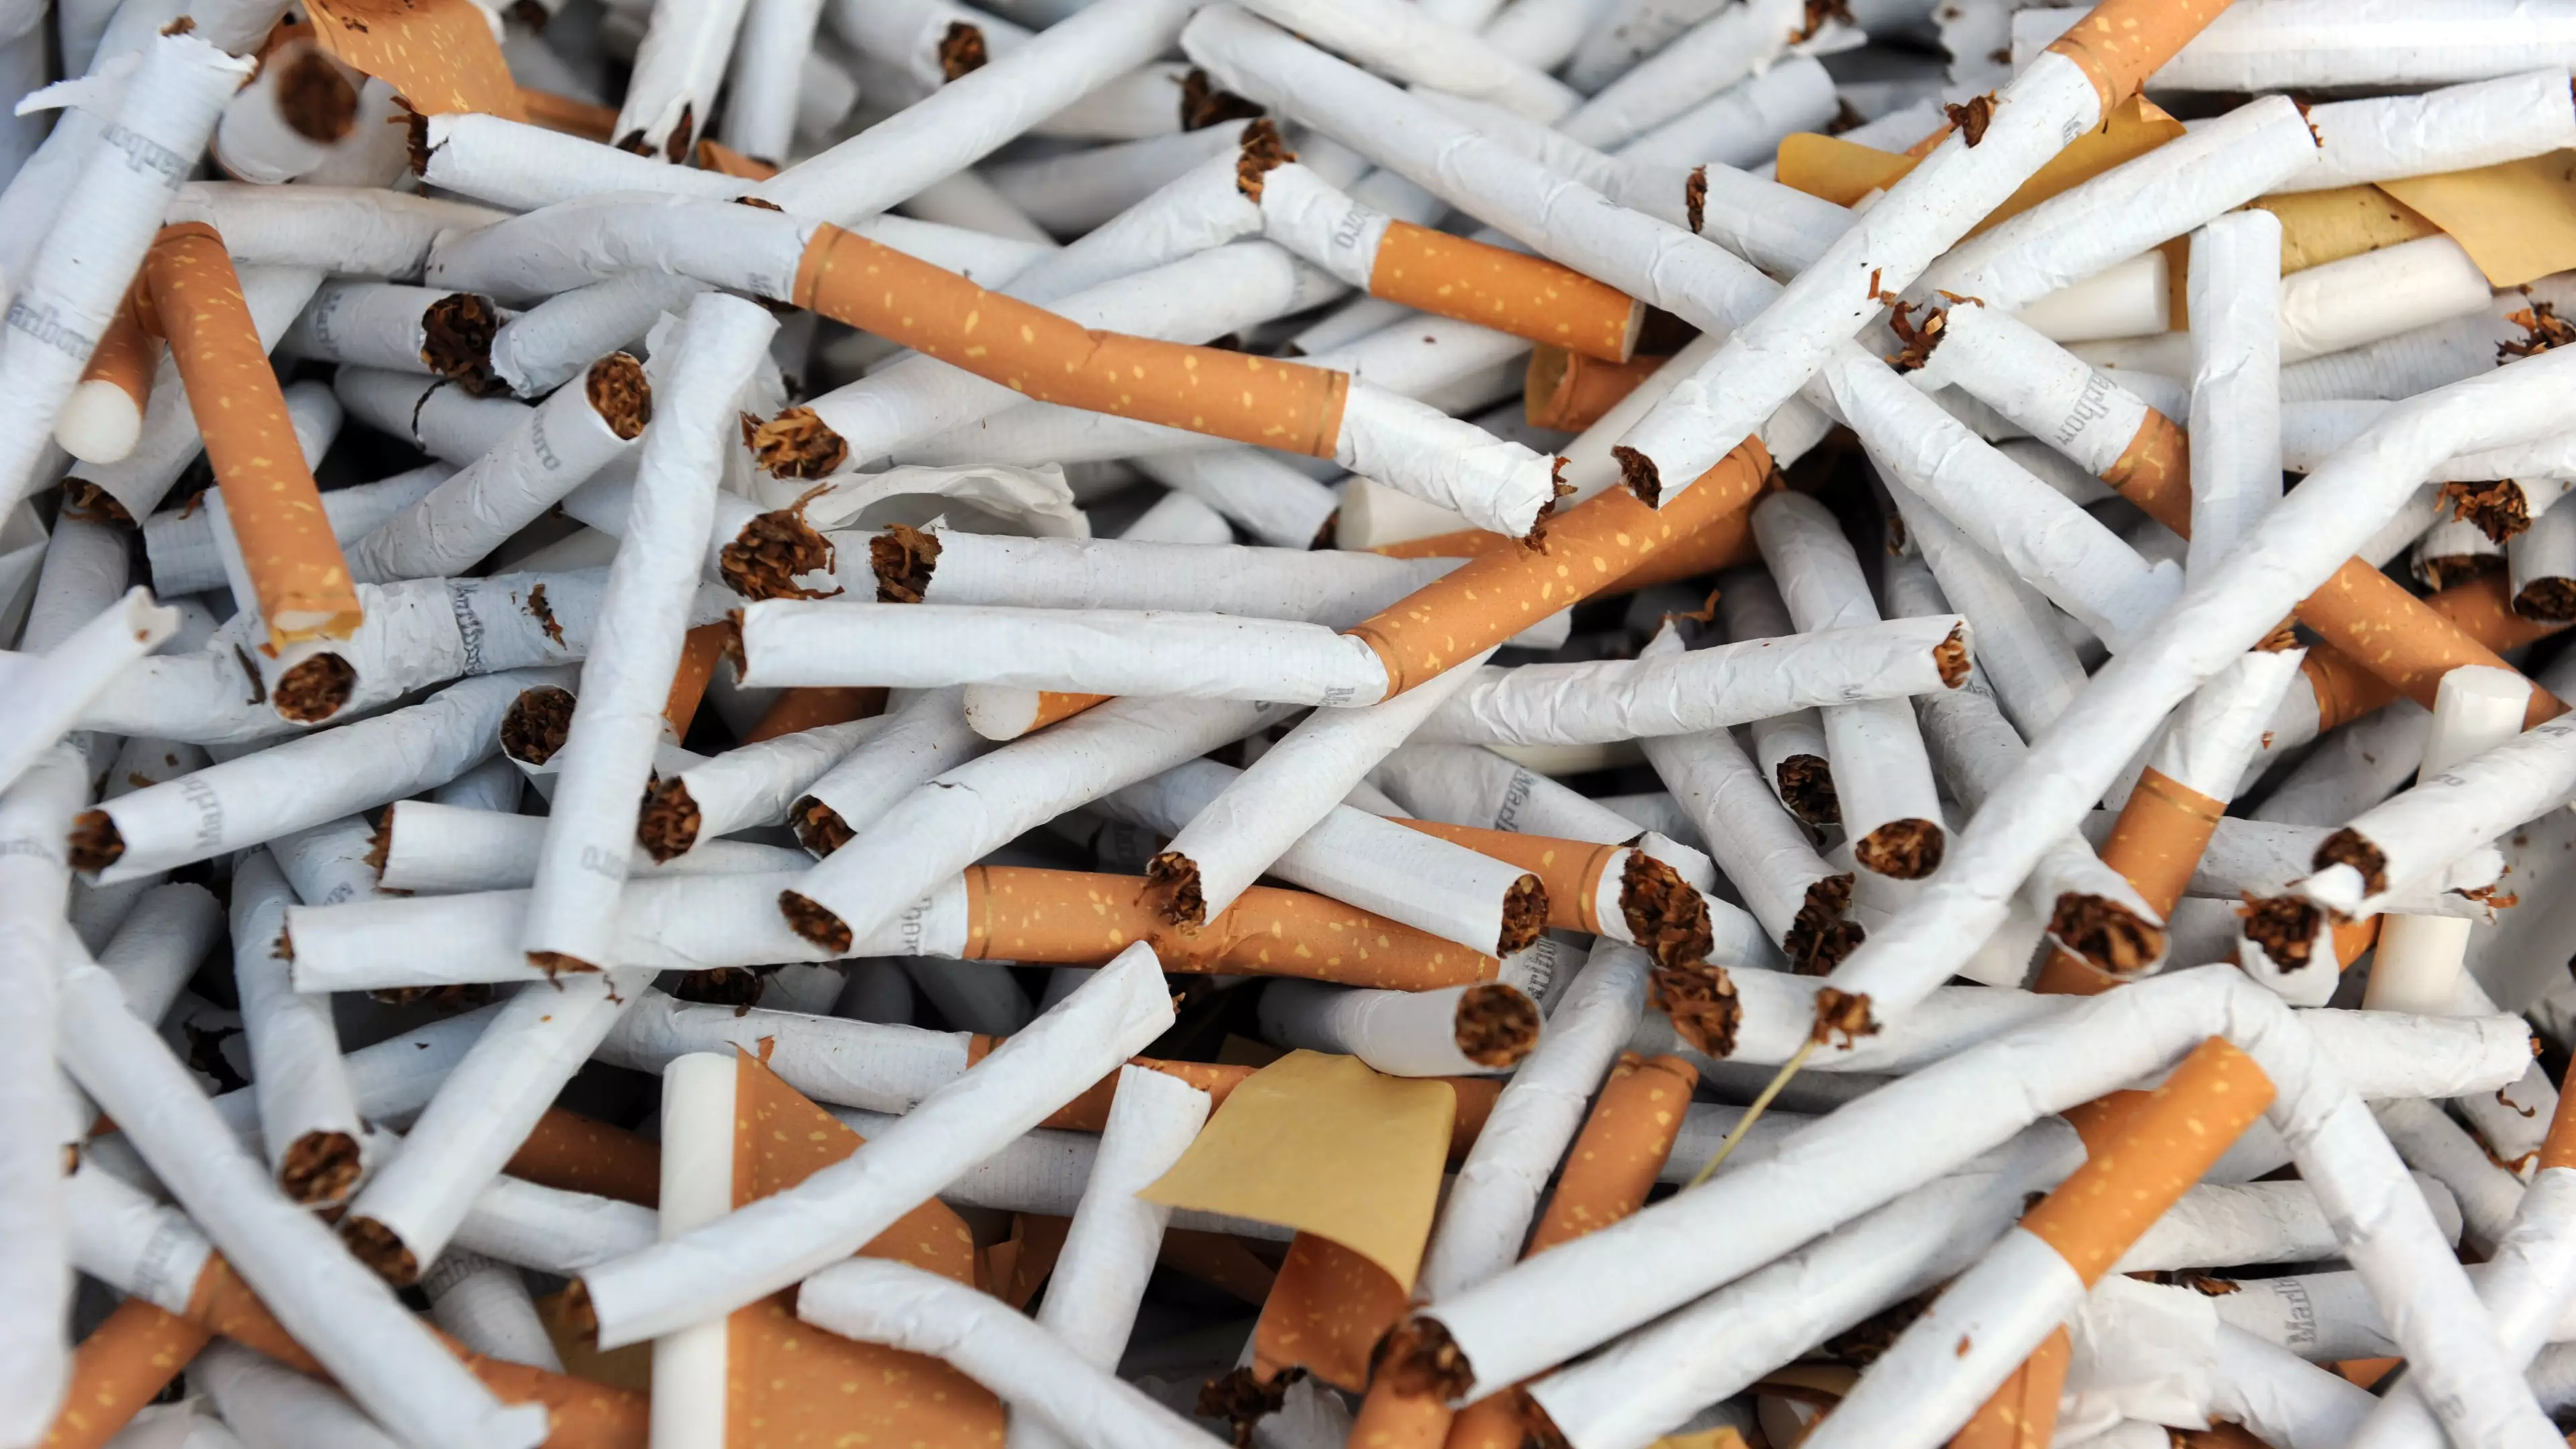 Fake Cigarettes Containing Asbestos, Arsenic And Human Poo Found In UK 